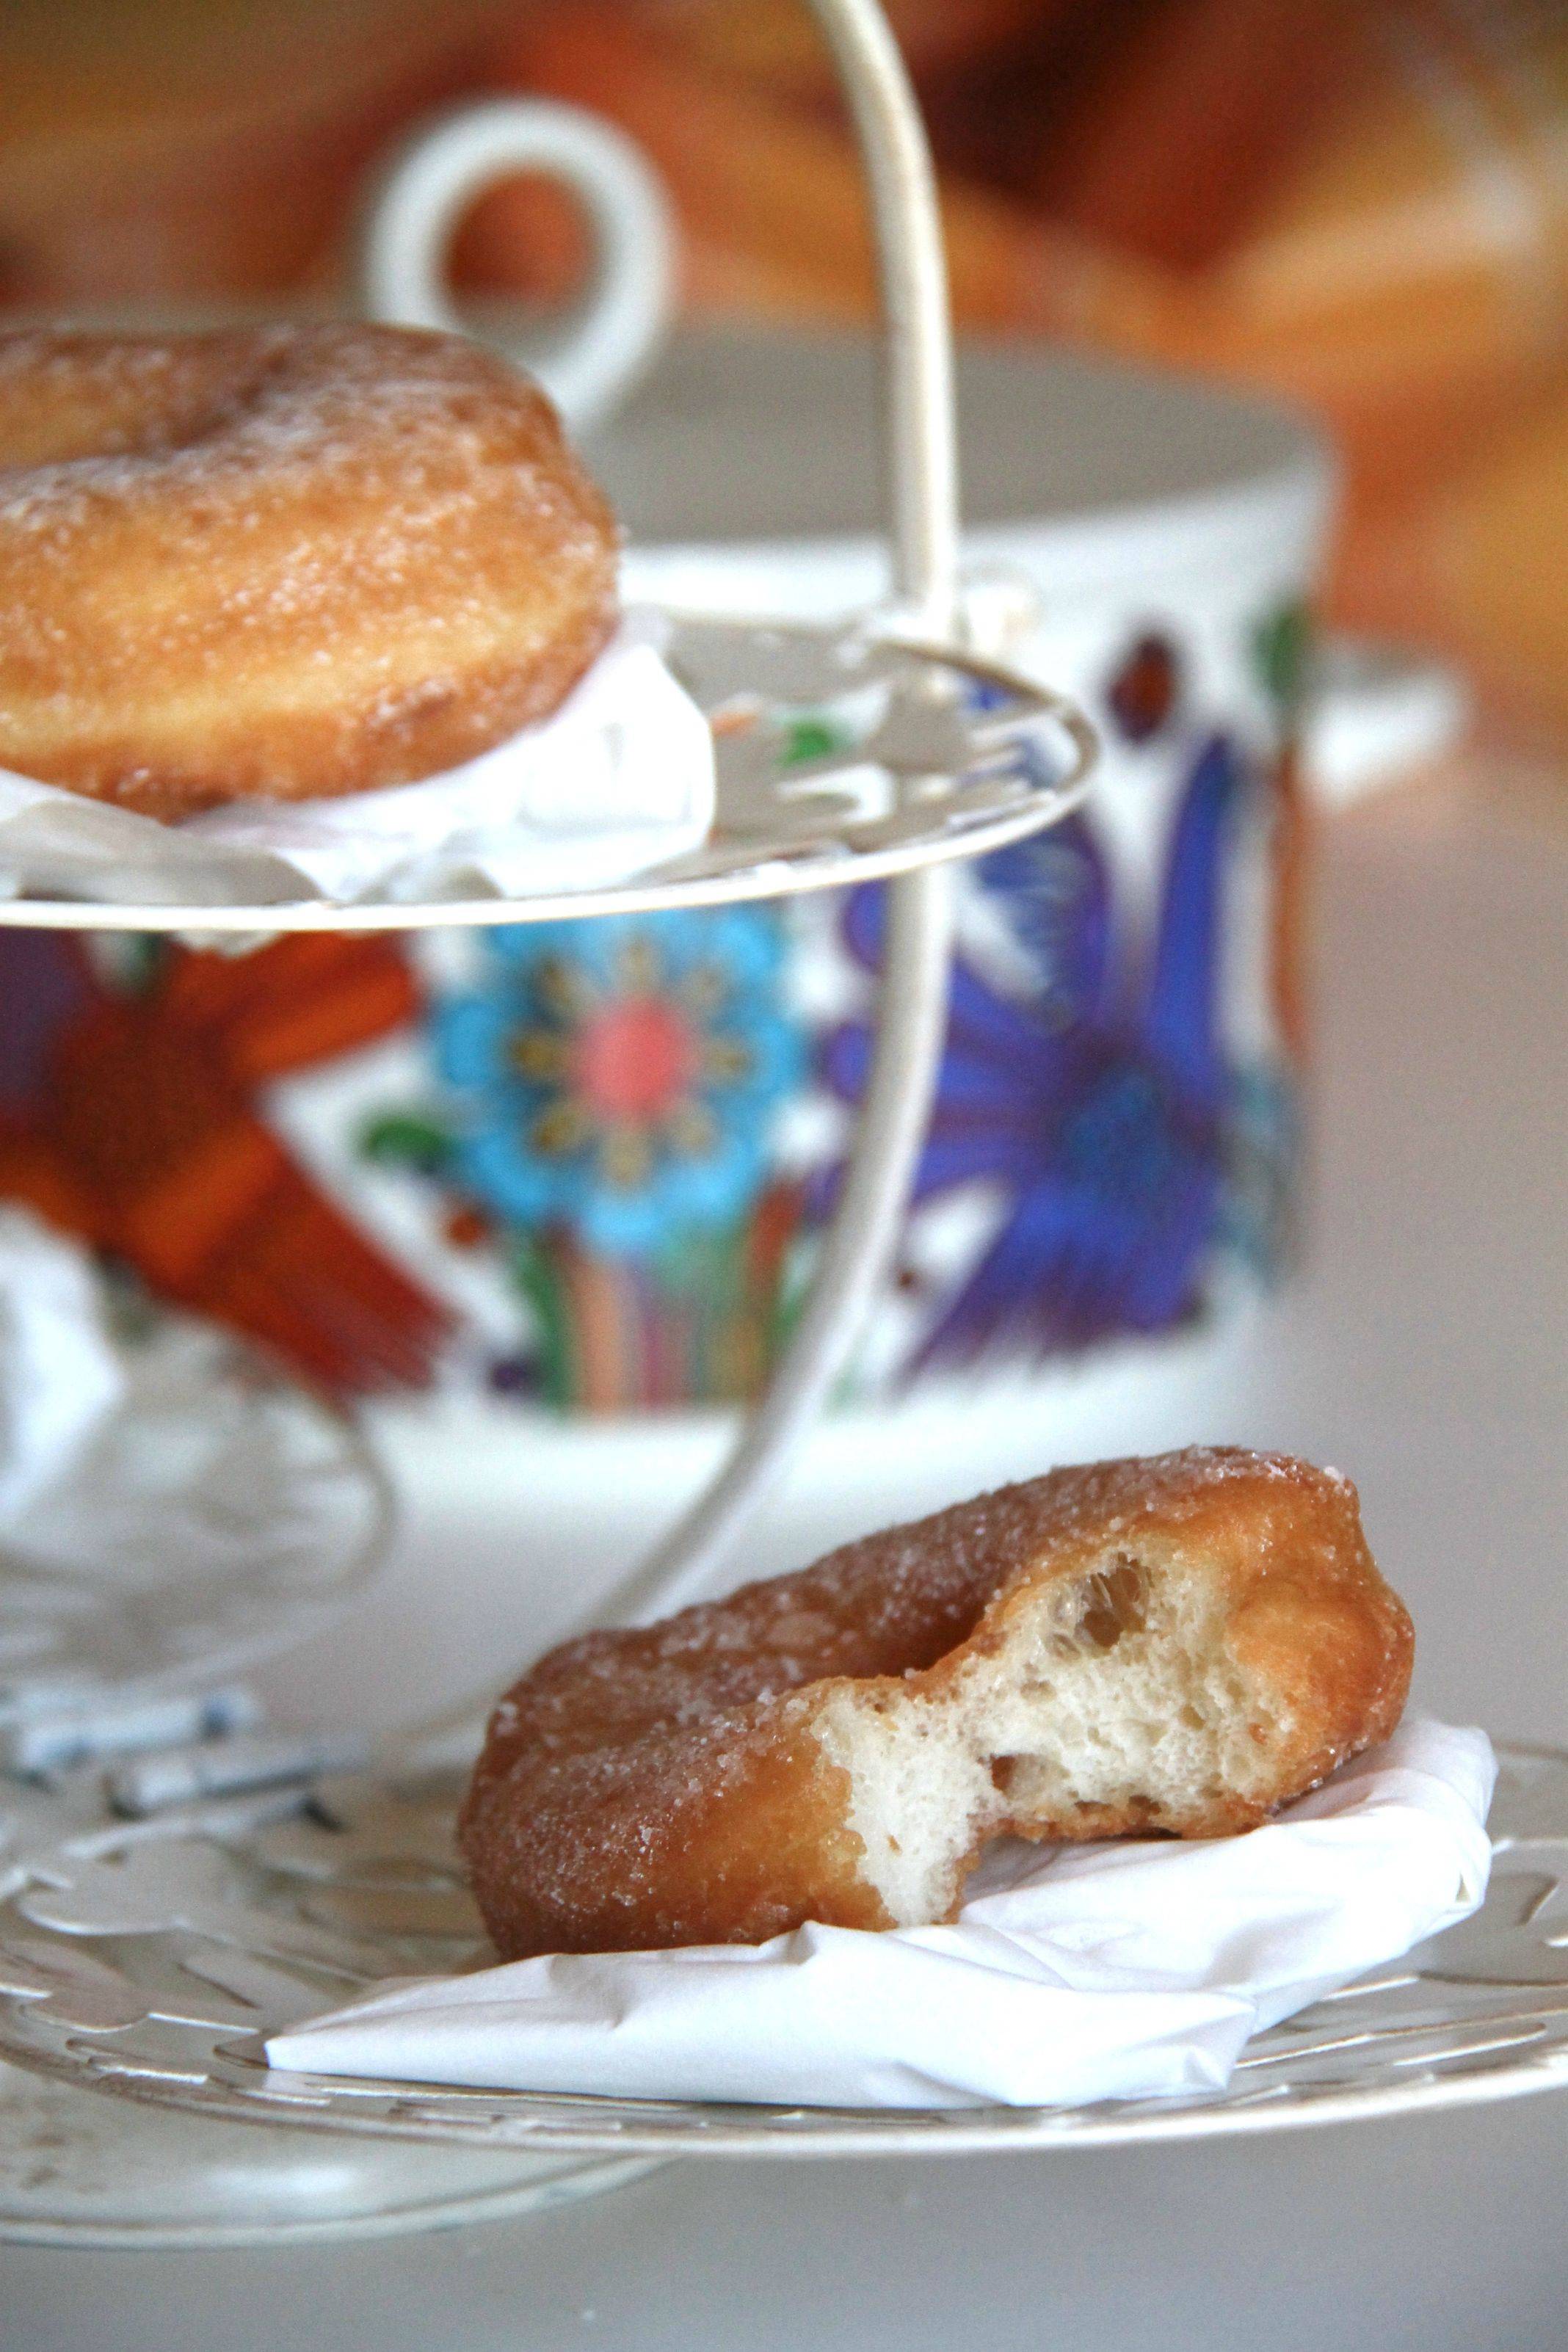 Donuts o ciambelle fritte